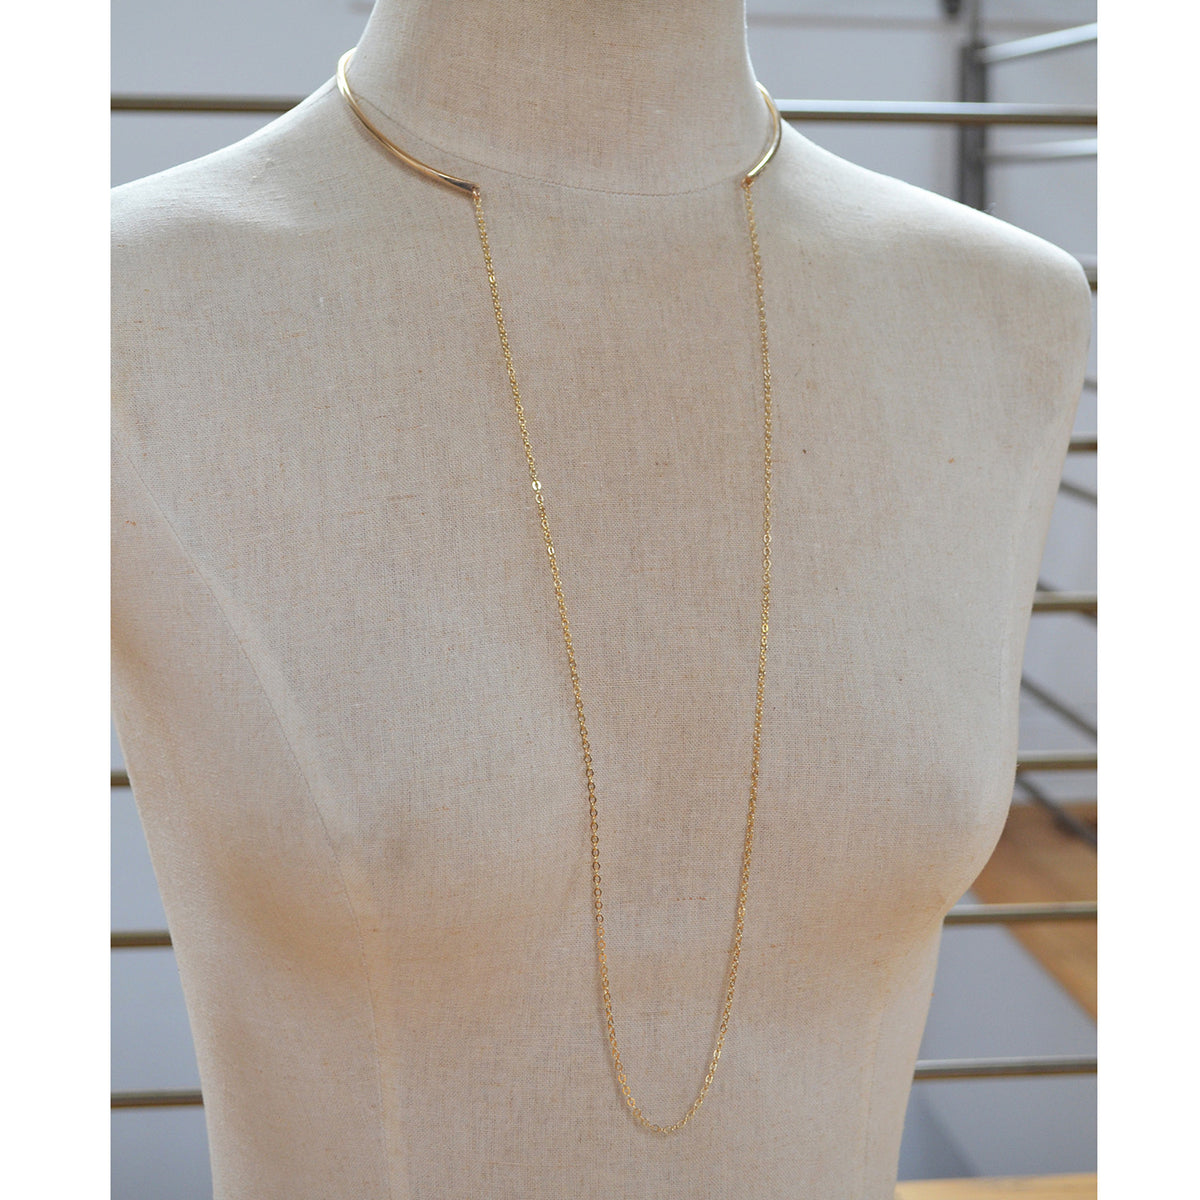 Chain Open Choker, Gold Filled and Sterling Silver